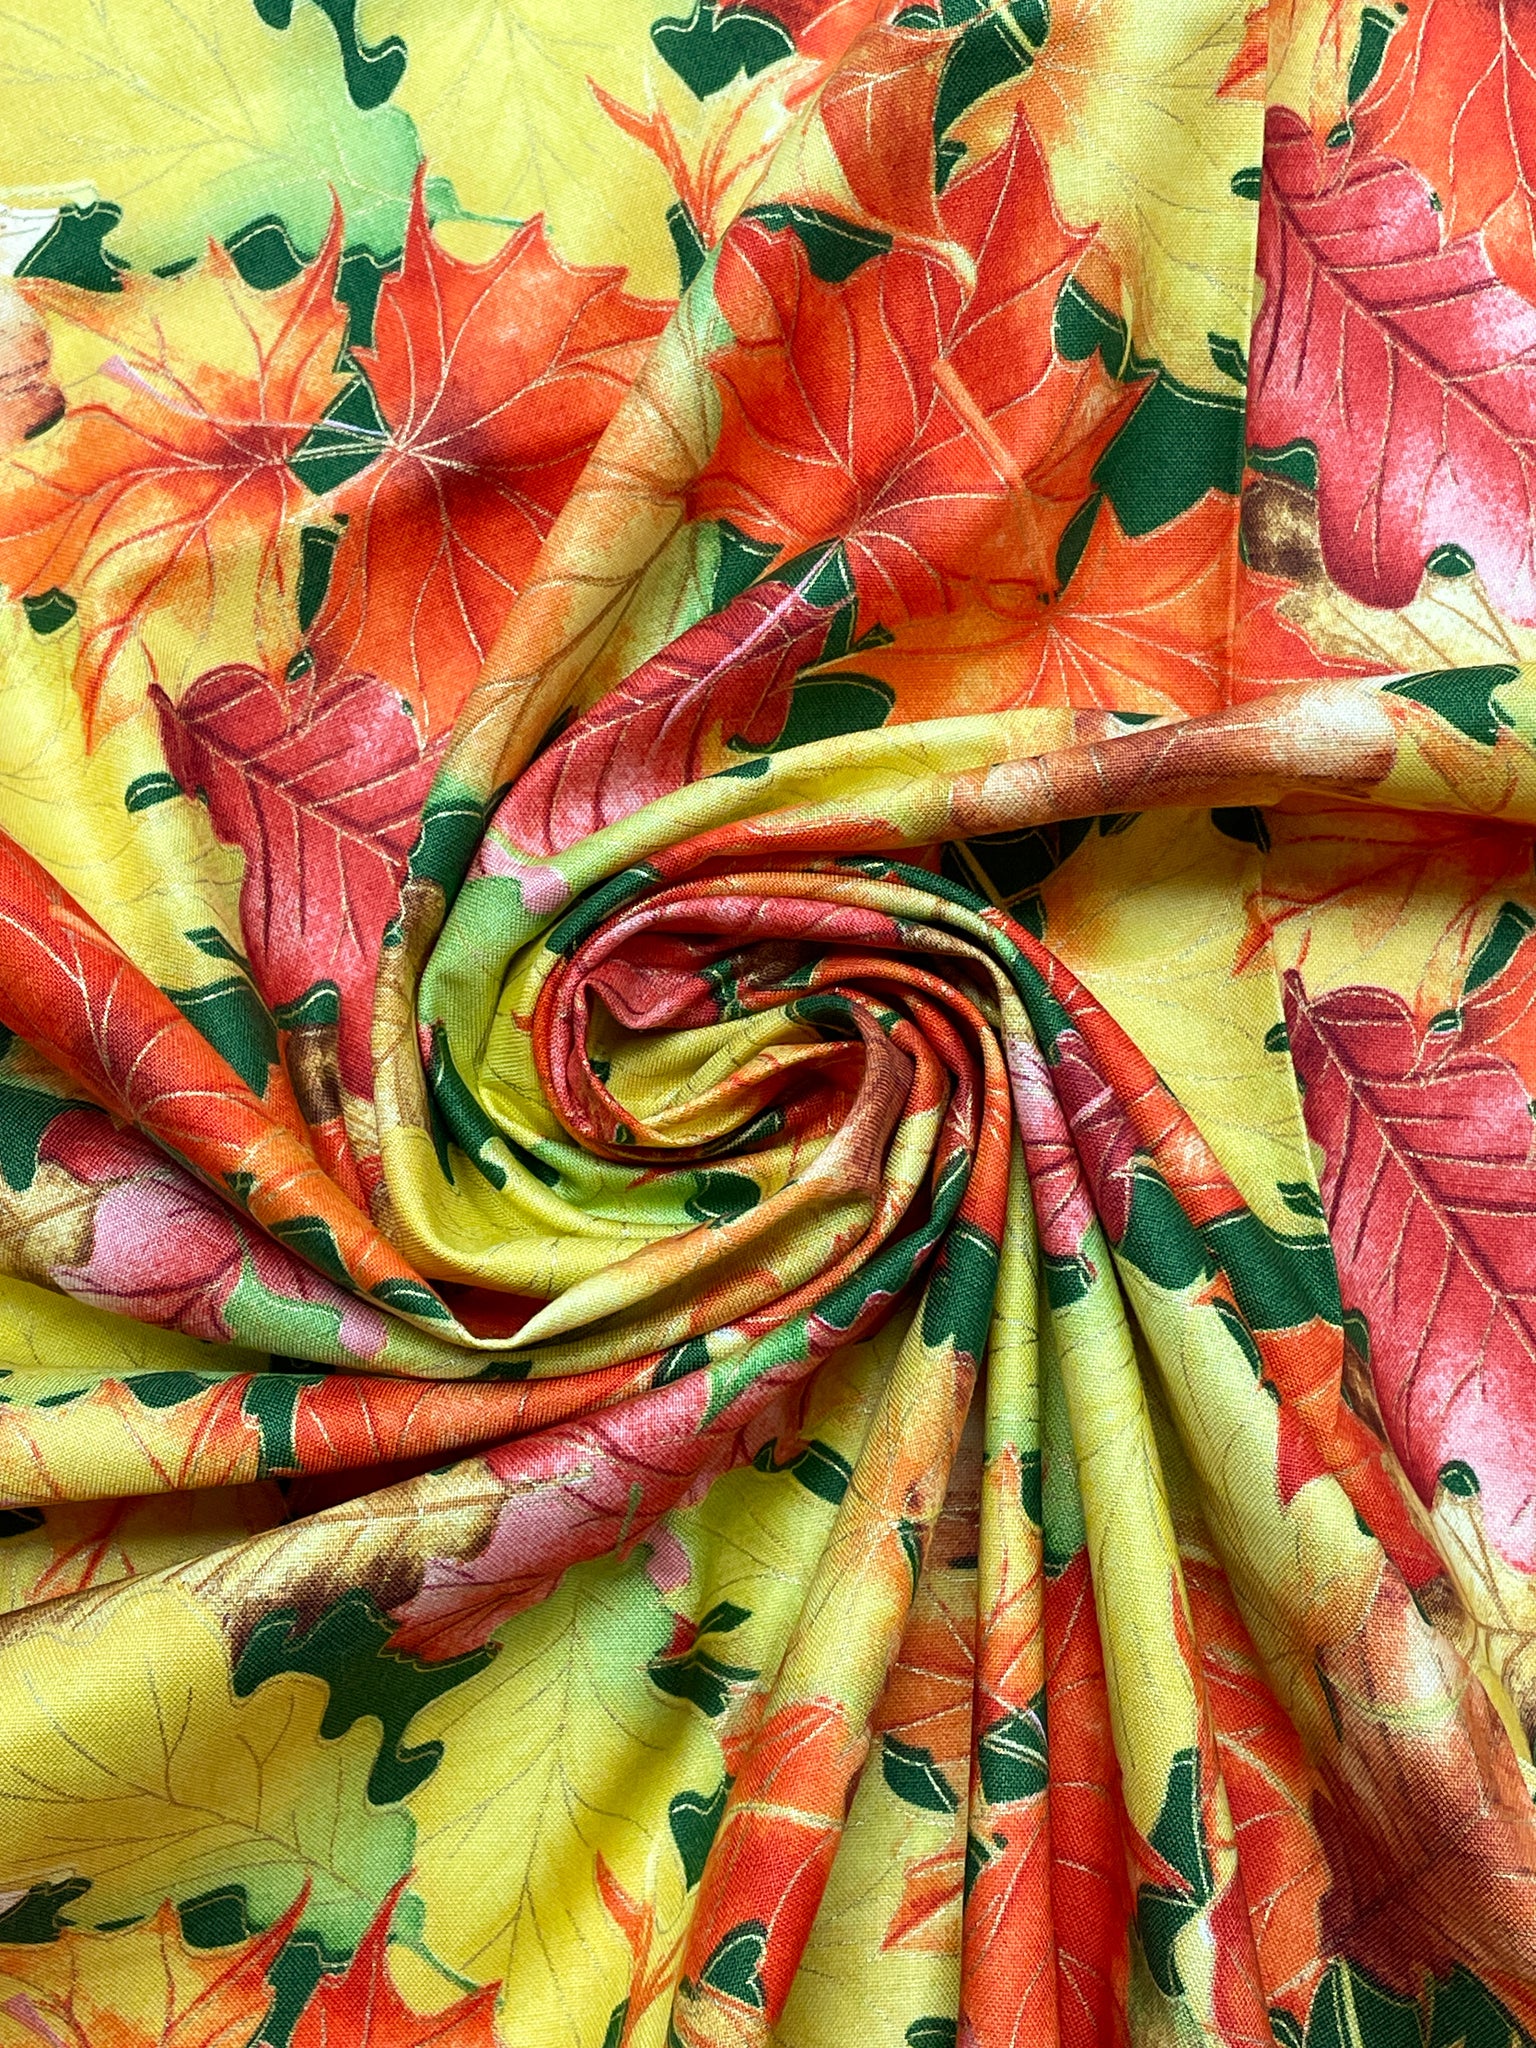 3 YD Quilting Cotton - Bright Autumn Leaves